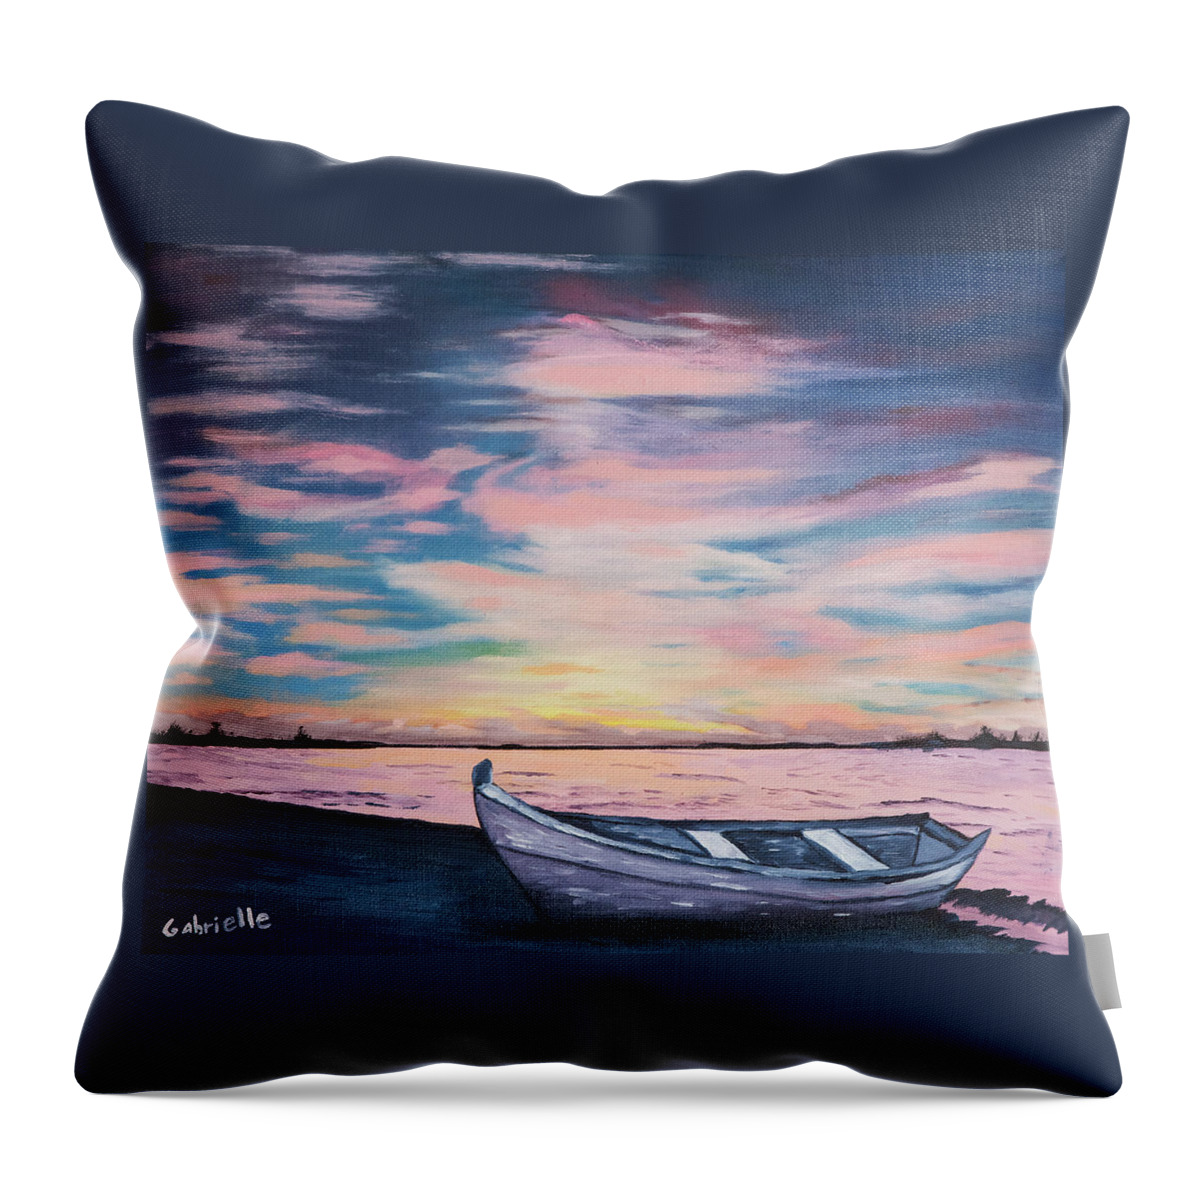 Lake Throw Pillow featuring the painting Lake Boat by Gabrielle Munoz